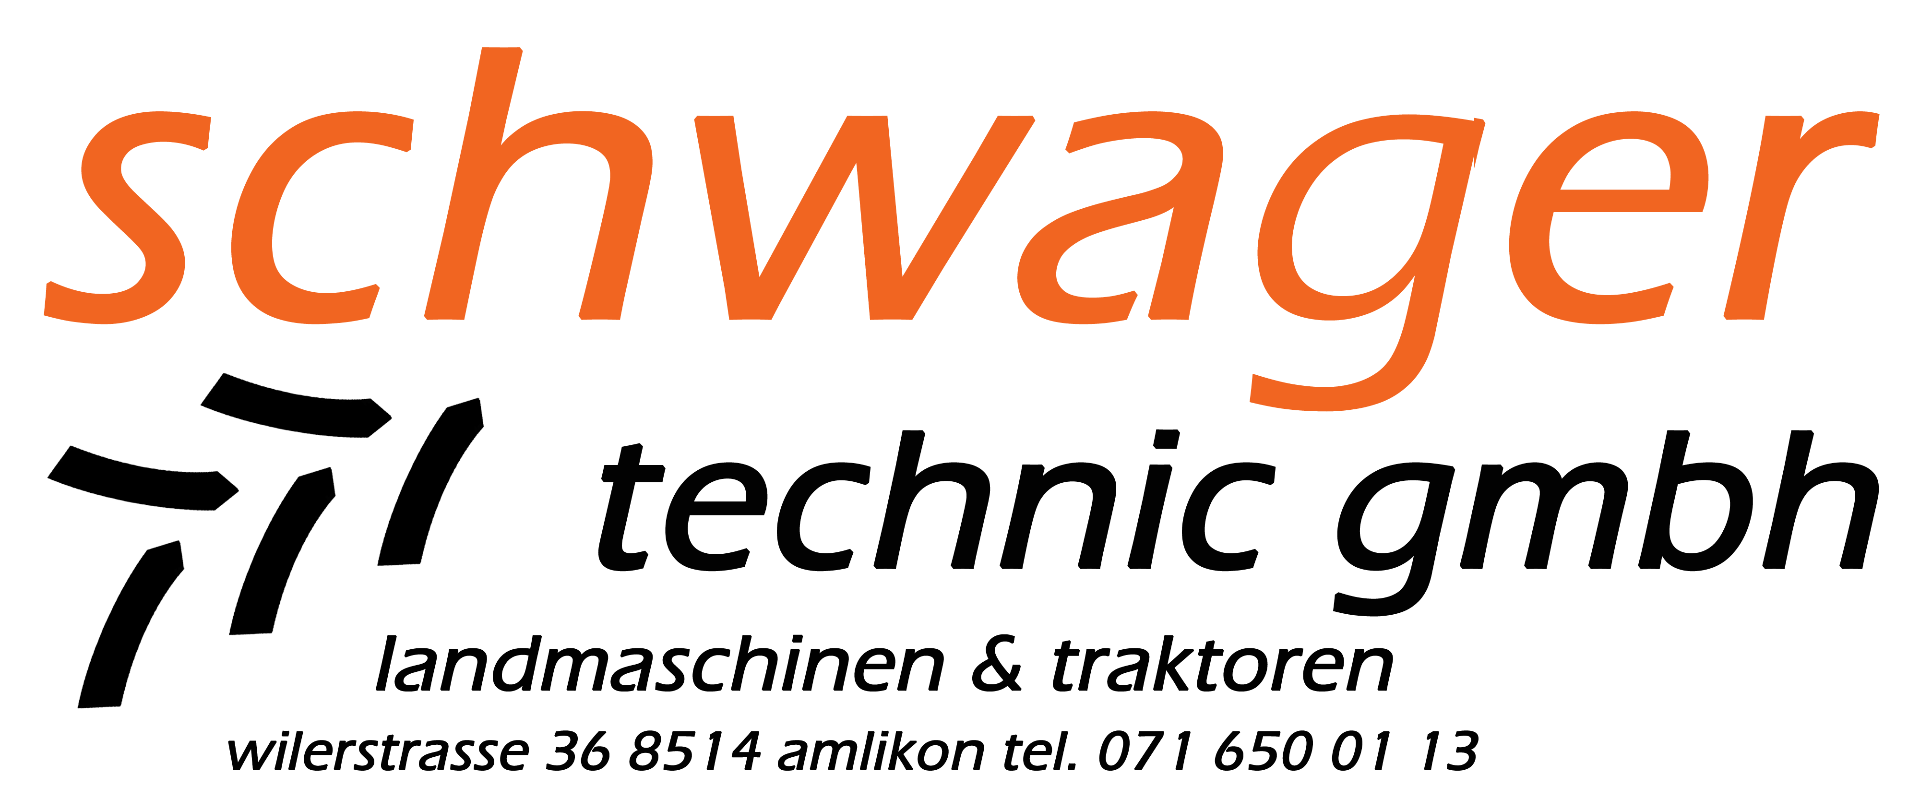 Logo schwager technic.png